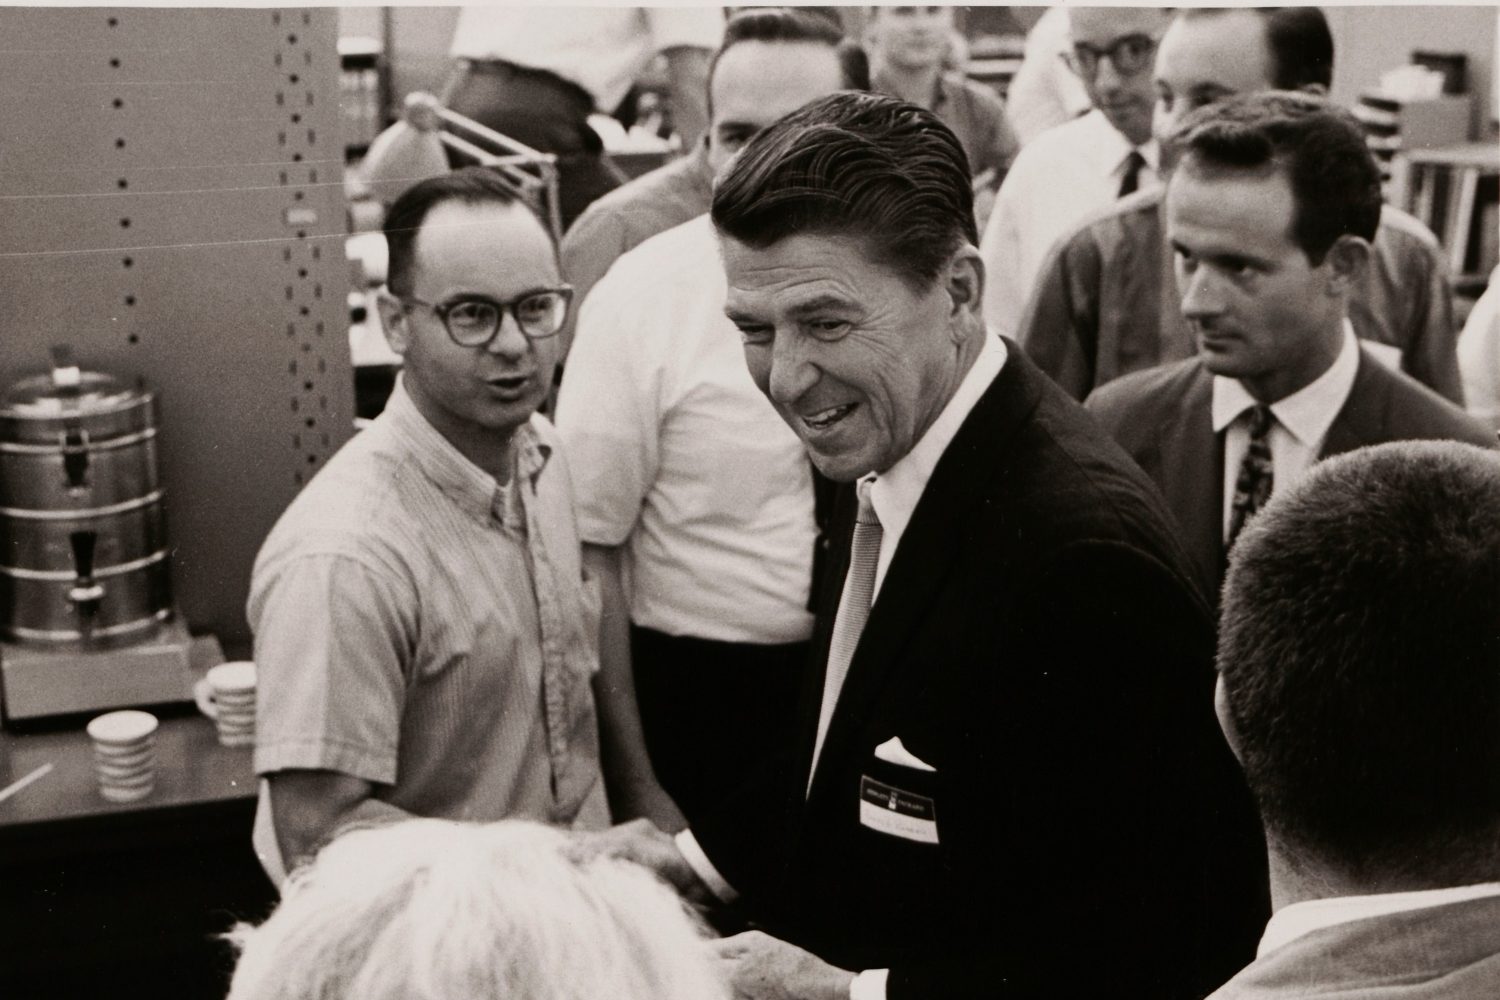 A photo of Ronald Reagan speaking with employees during his visit to Hewlett-Packard in 1966